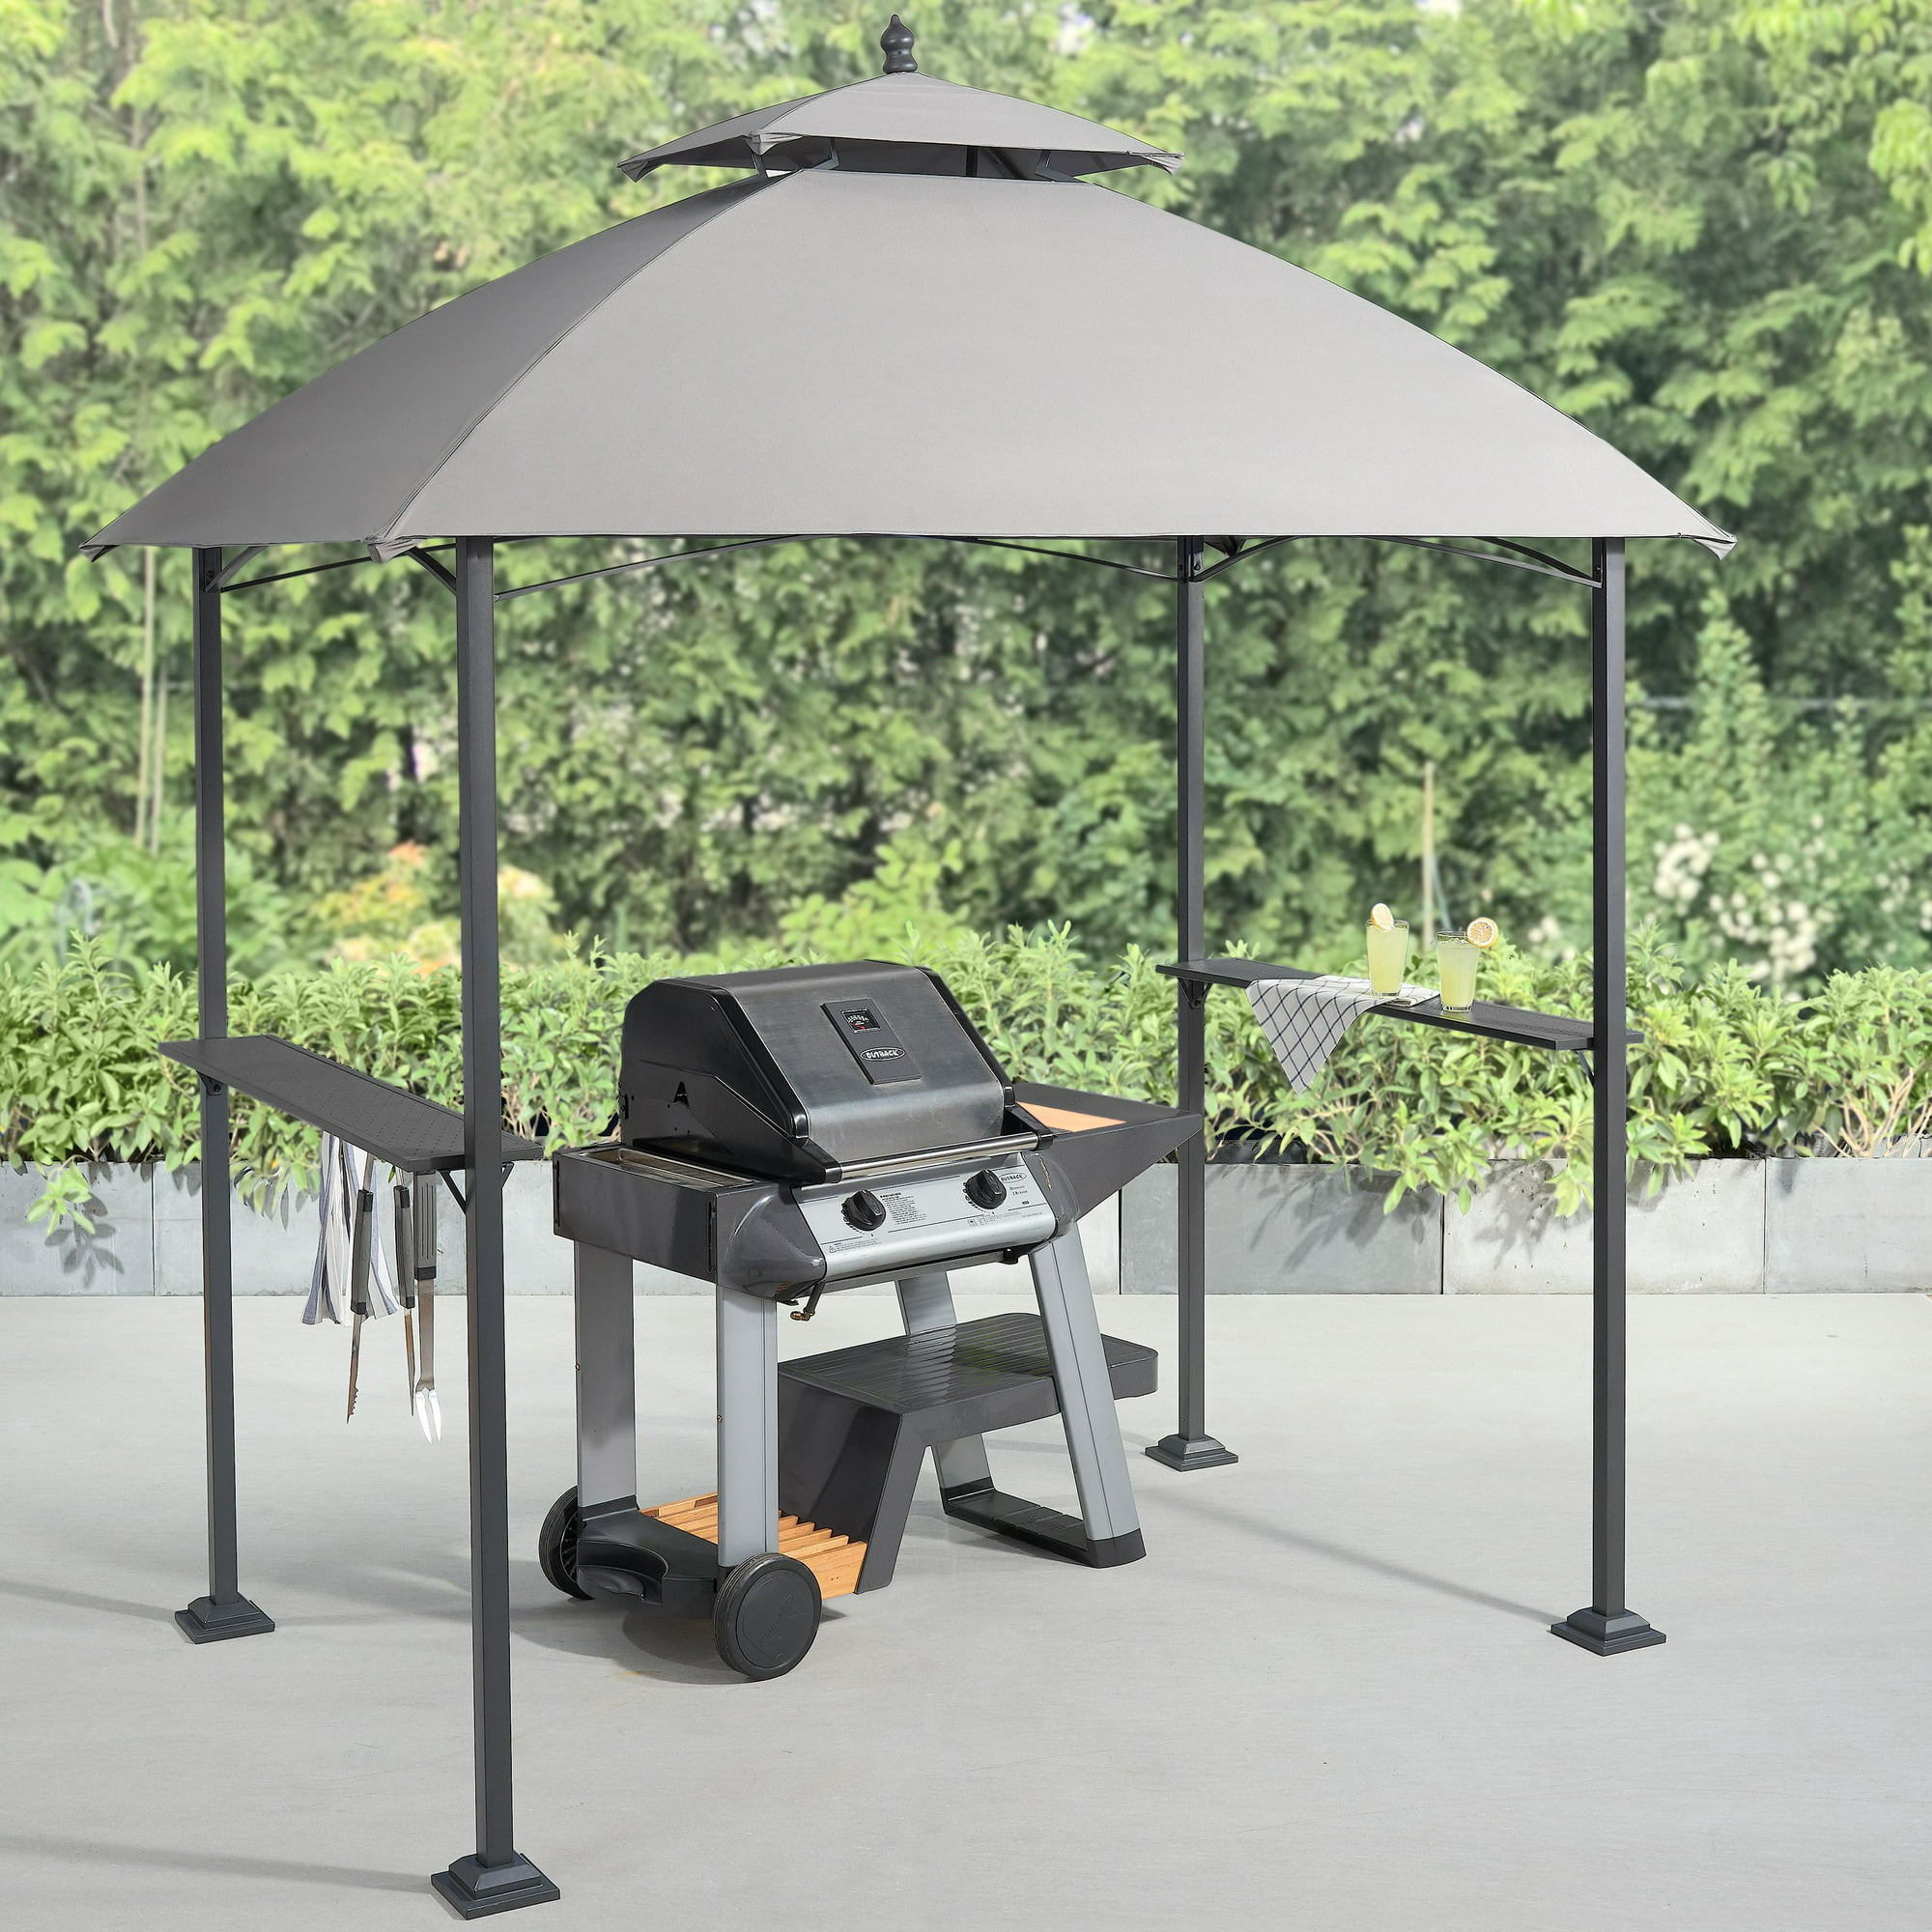 Mainstays Ledger 7.8W x 4.9D ft. Outdoor Canopy Top Grill Gazebo